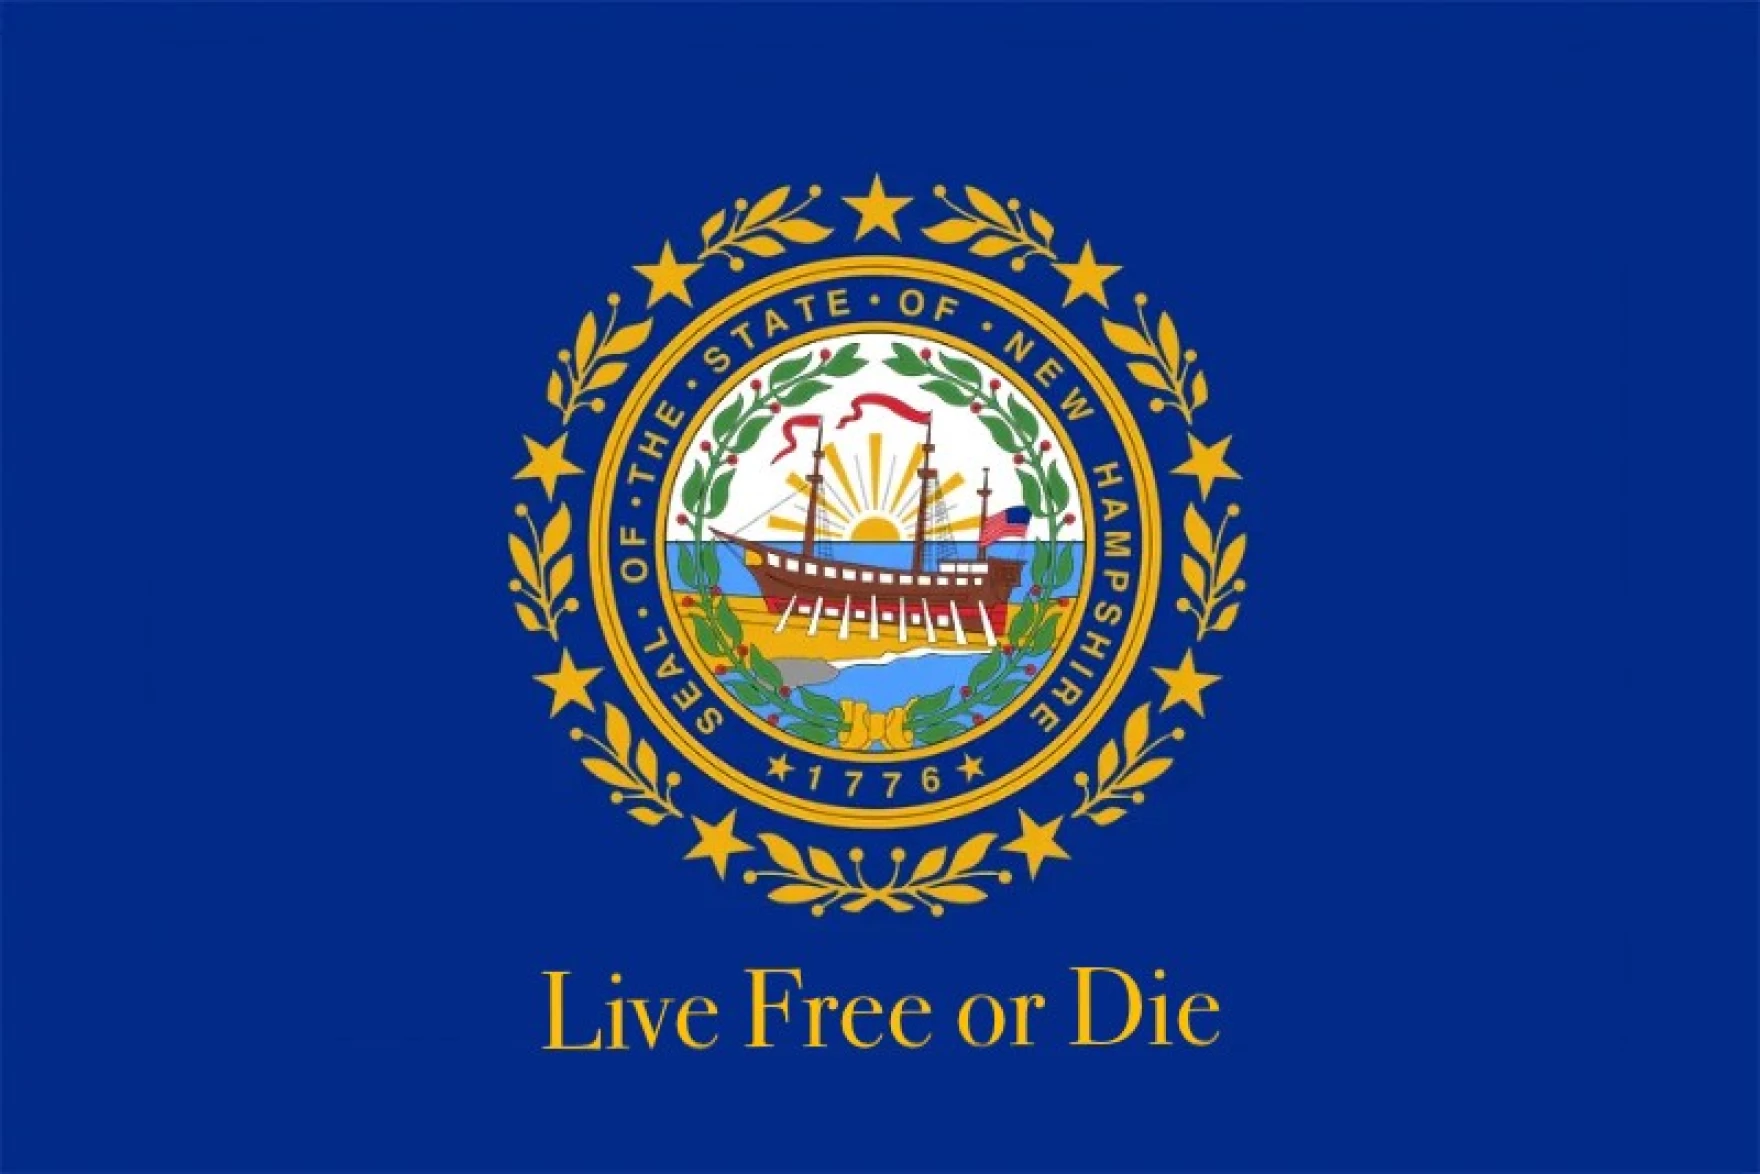 Wave Free or Die: Should This be the New State Flag?